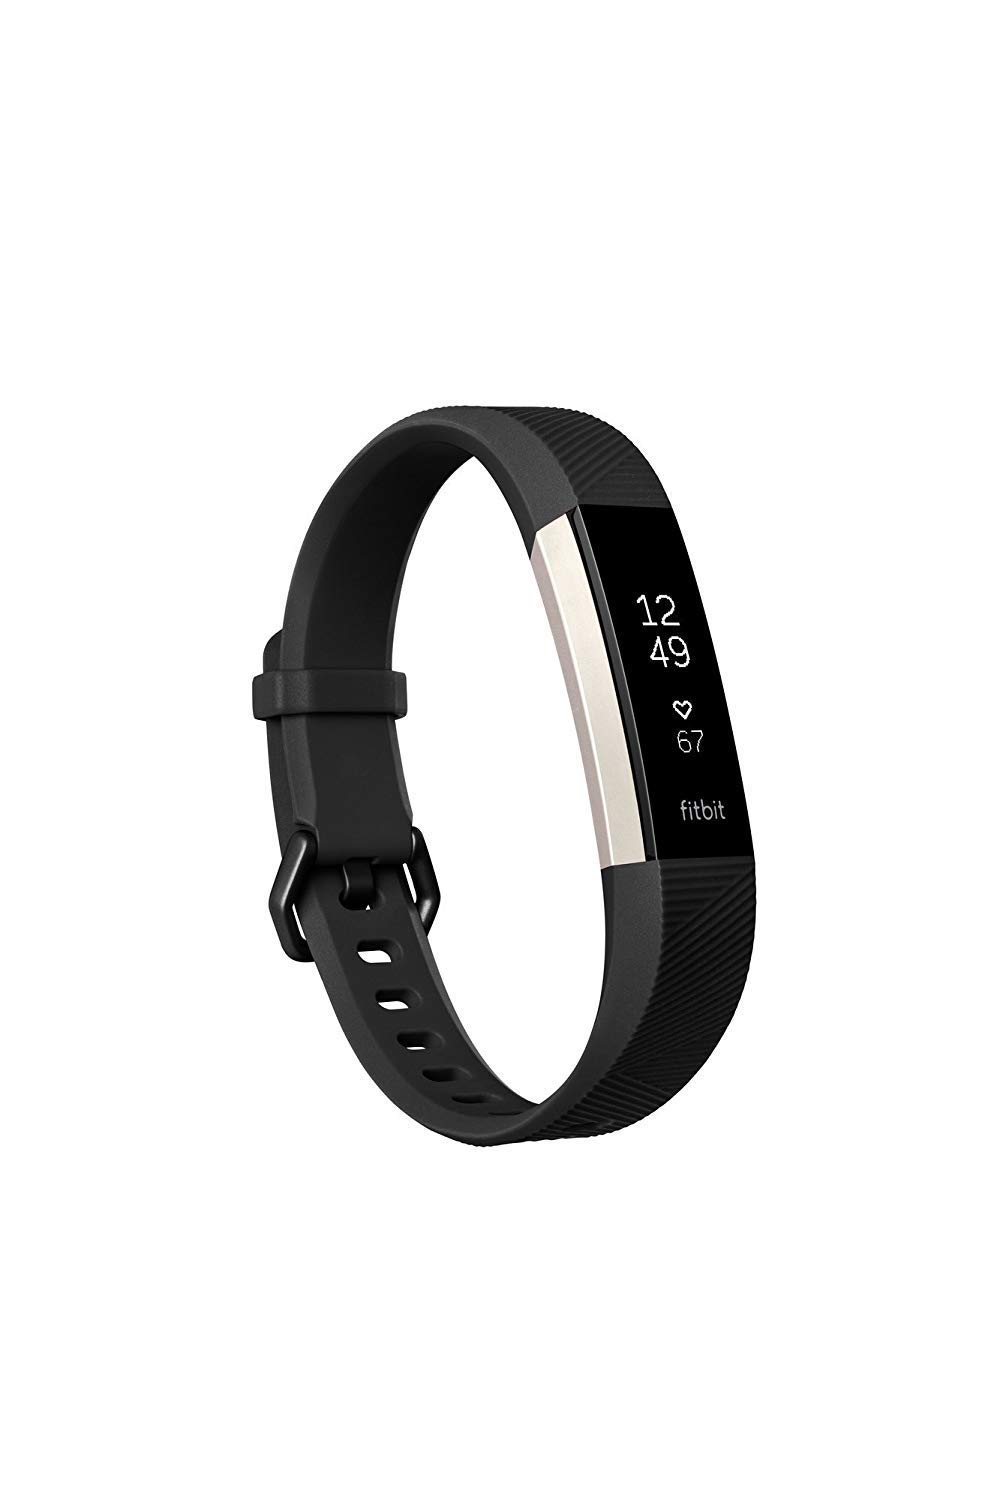 Book Cover Fitbit Alta HR, Black, Large + 1 Year Extended Warranty Bundle